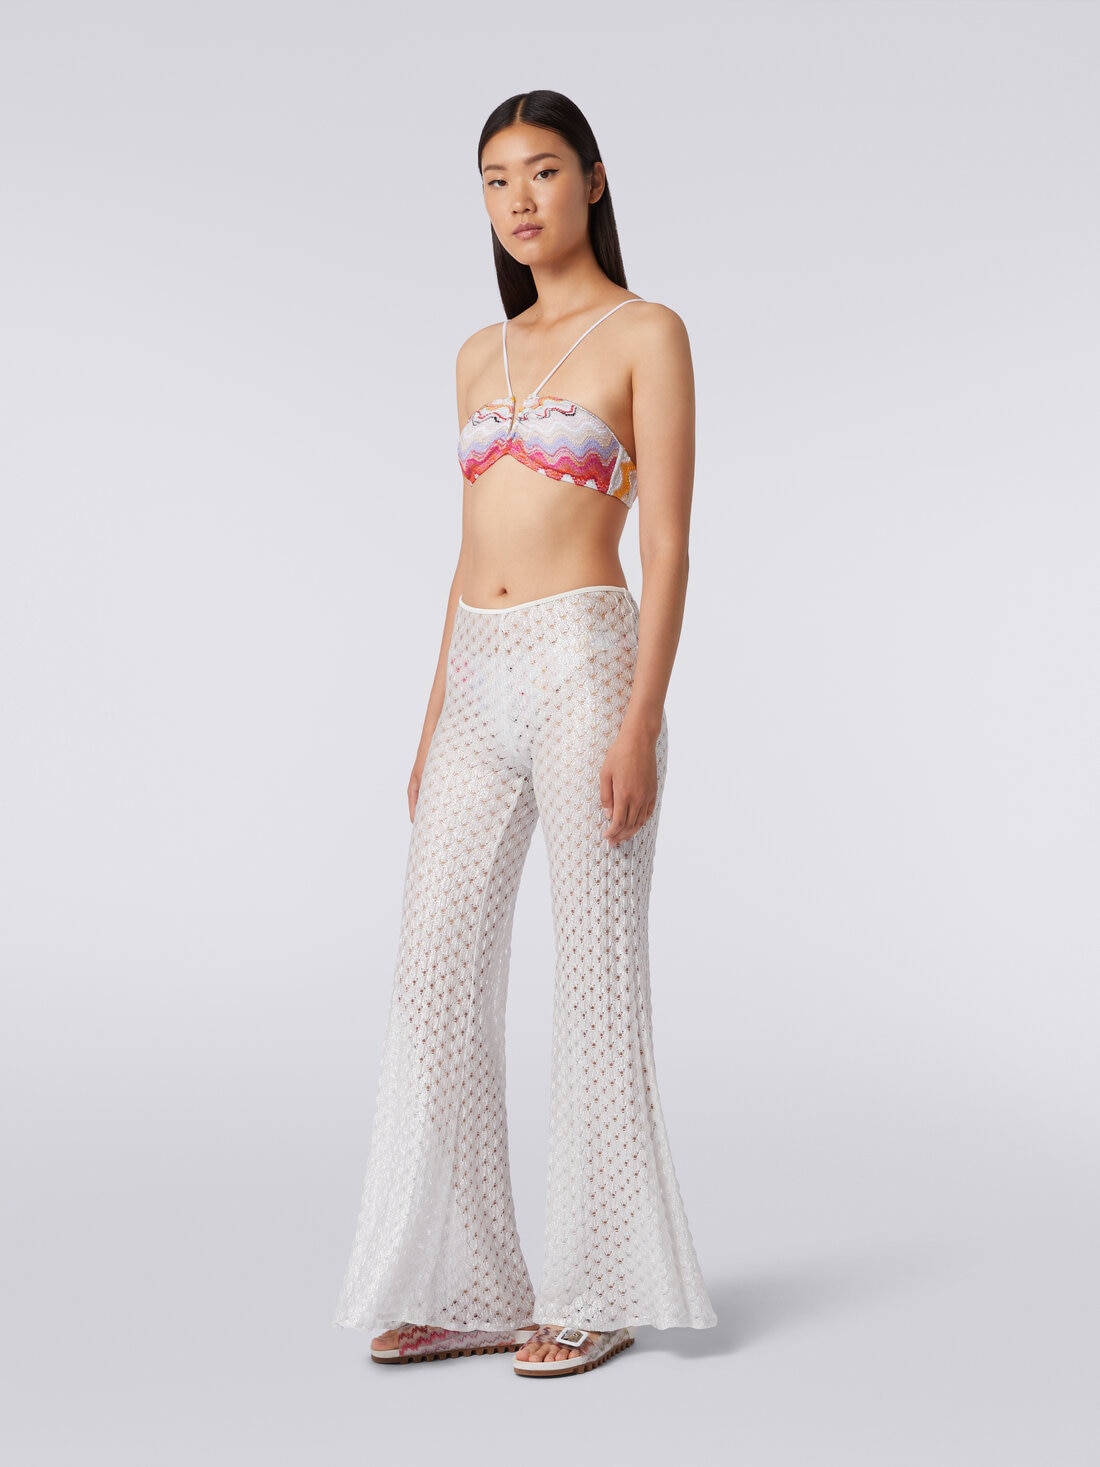 Lace-effect cover up trousers with flared hem, White  - MS24SI00BR00TC14001 - 2